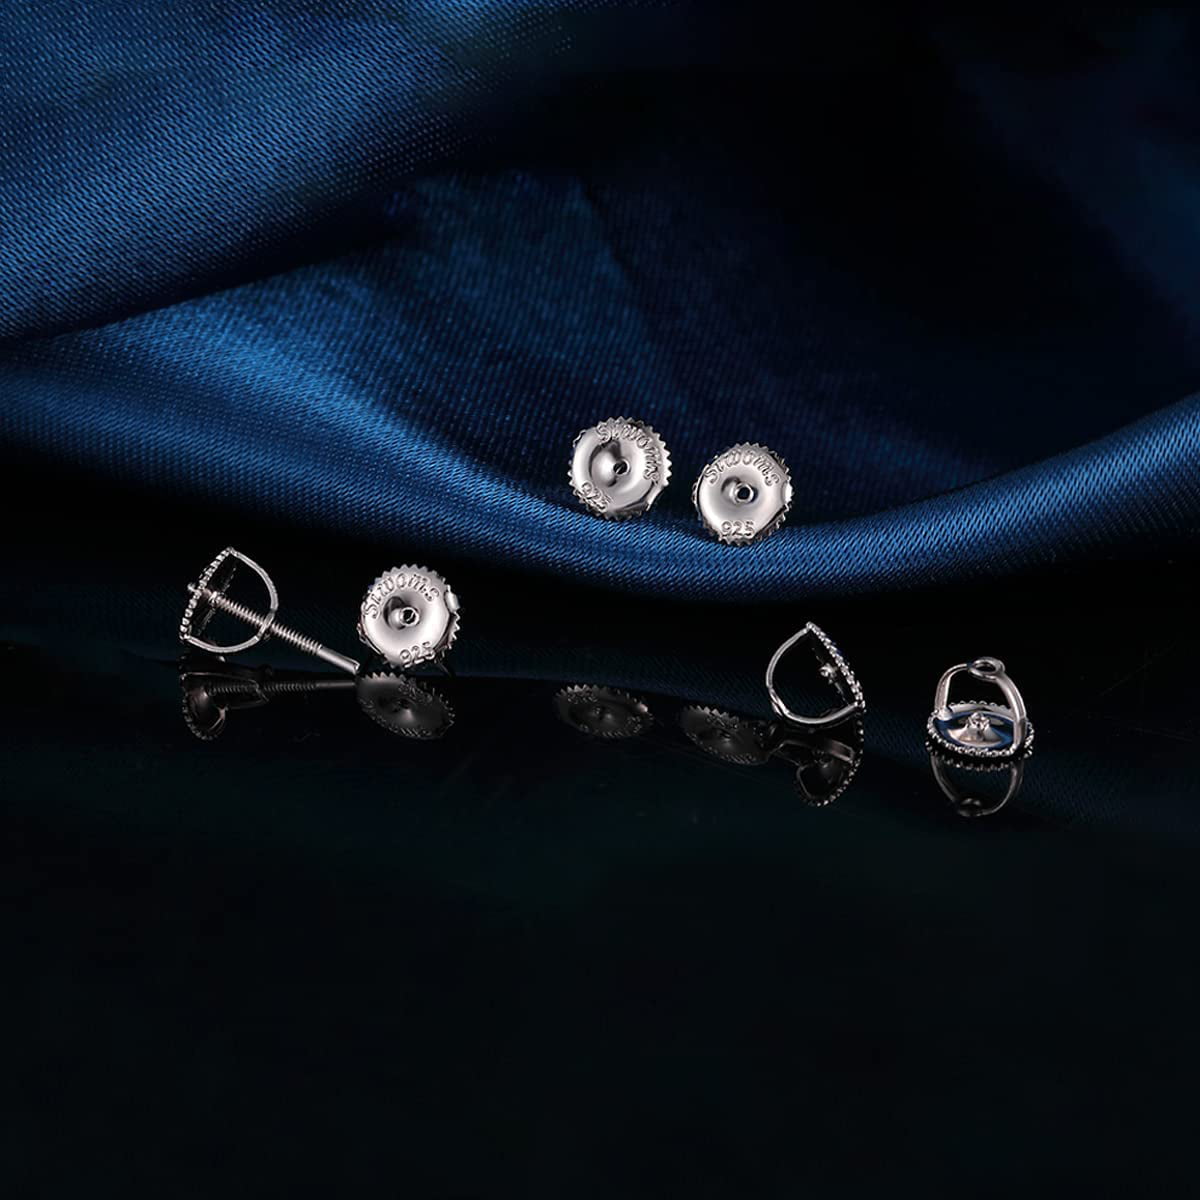  Safety Earring Backs for Studs, Silver Screw on Earring Backings  Replacement - 2-Pairs, No Poke for Threaded Post 0.032